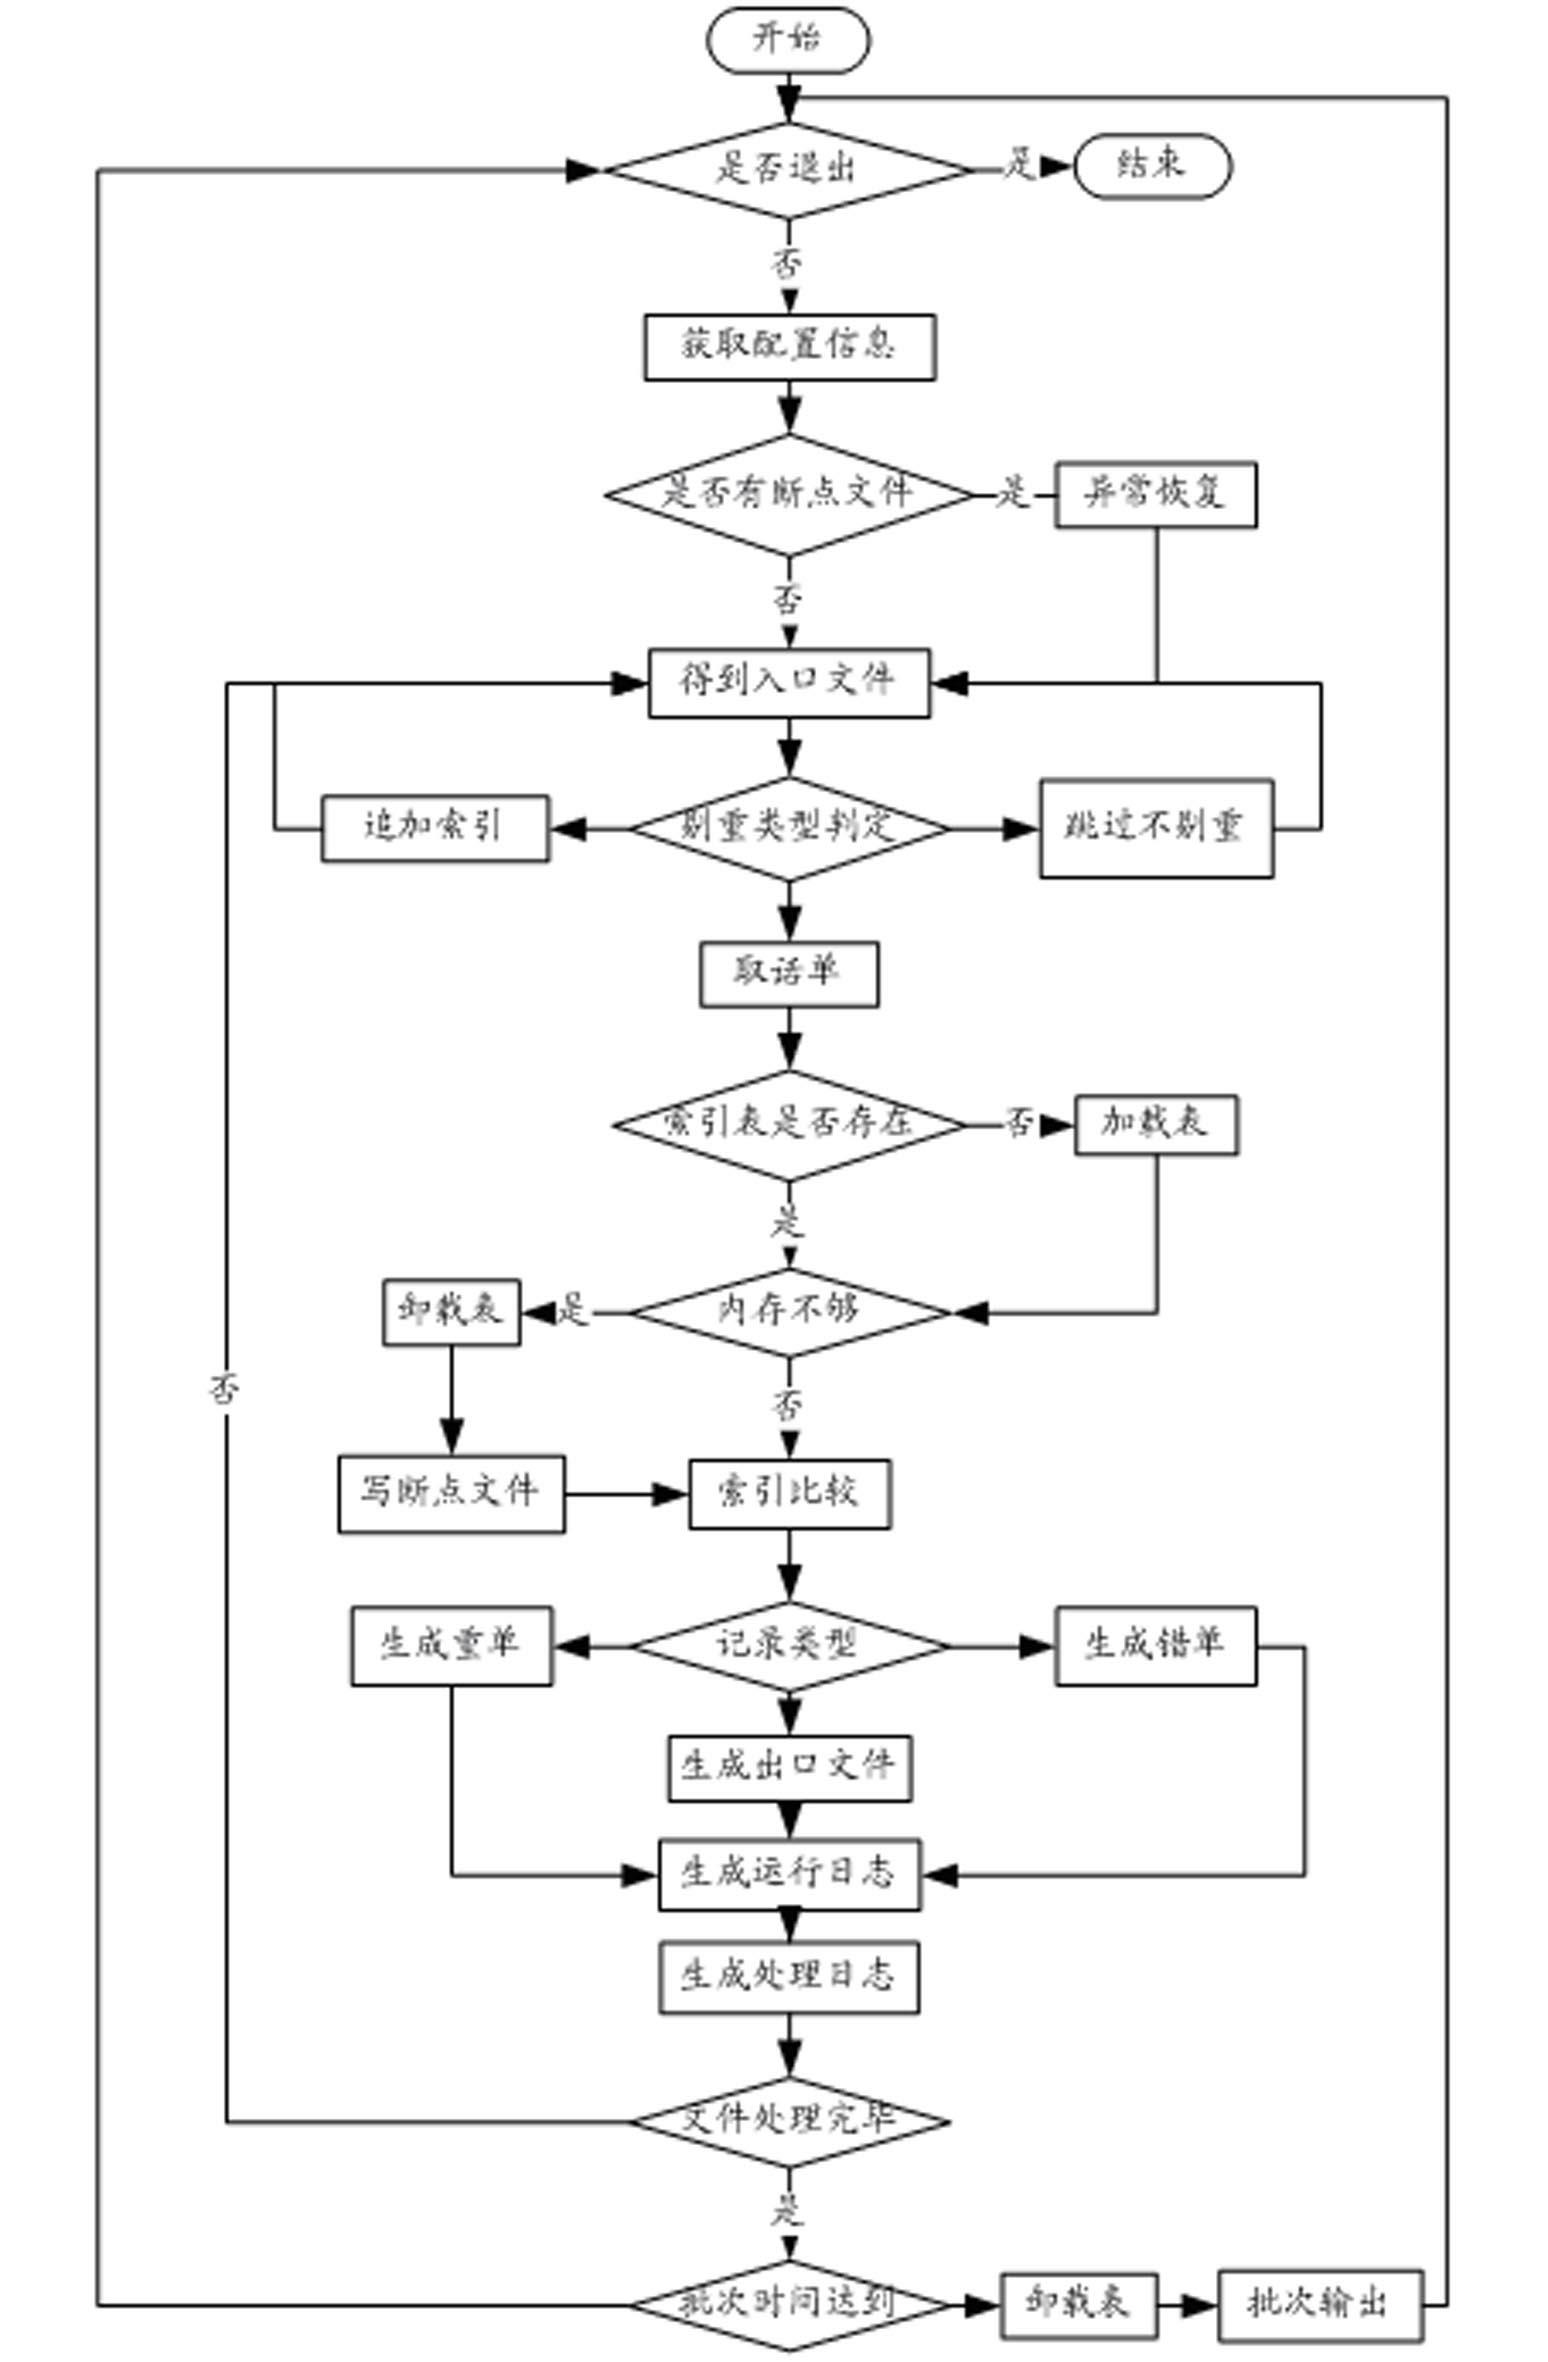 Method for eliminating repetition of memory dialog list